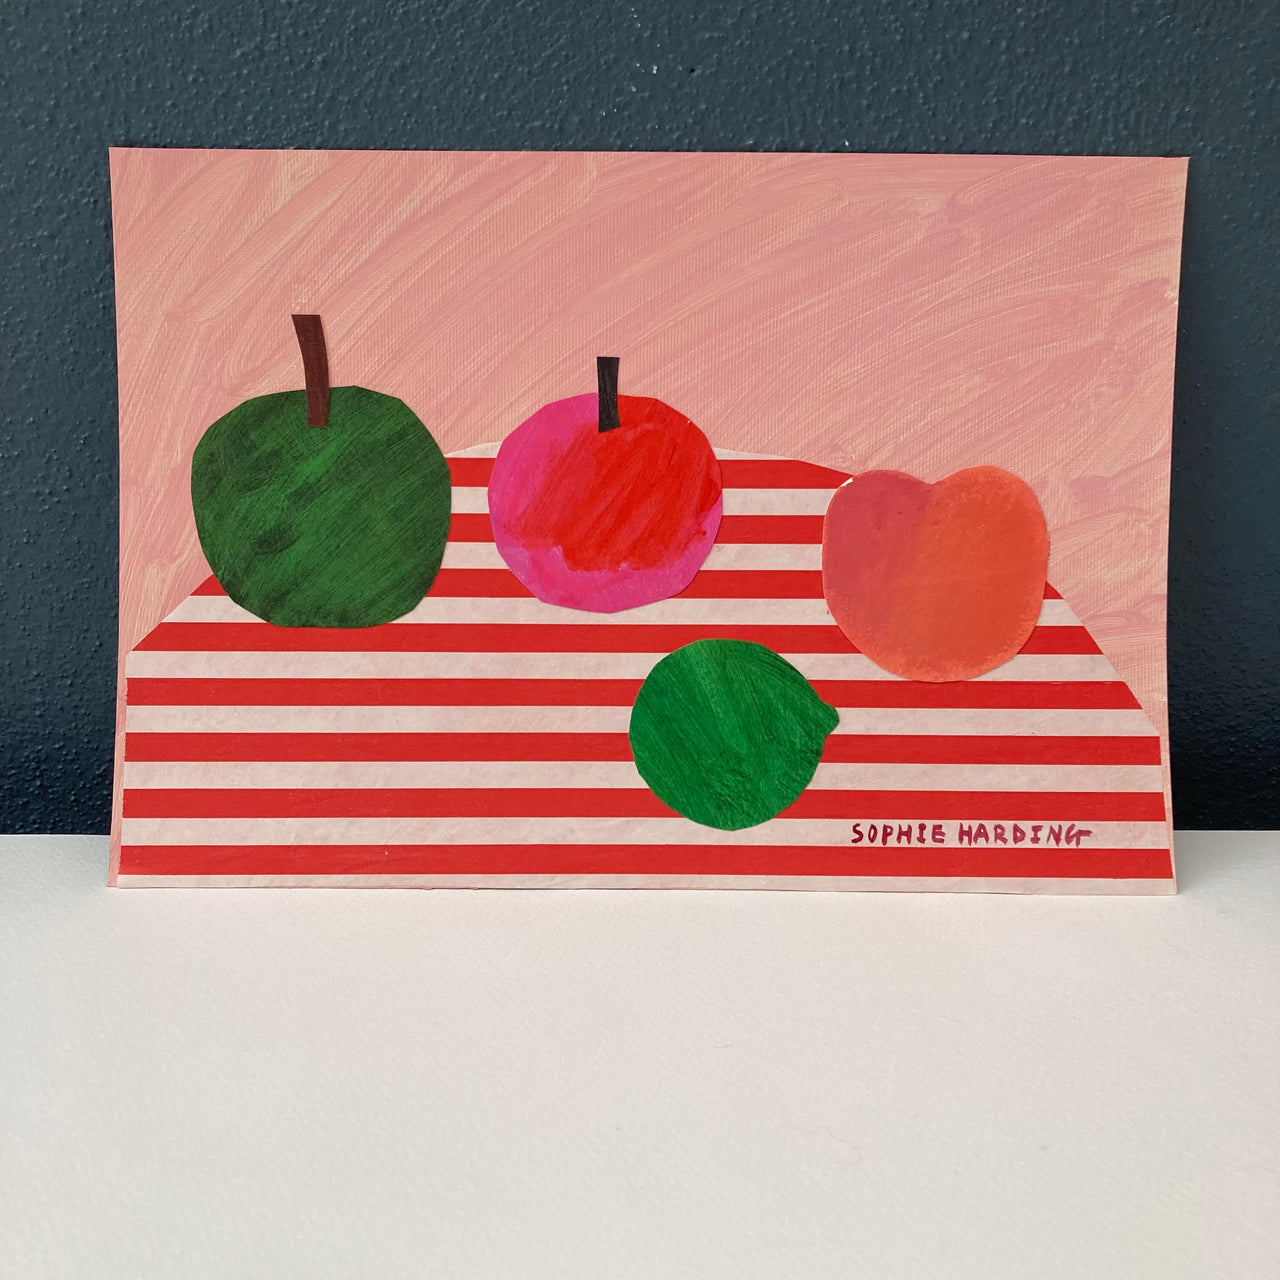 Cornish artist Sophie Harding, Green and red apples and peach on red and white stripy and pink background